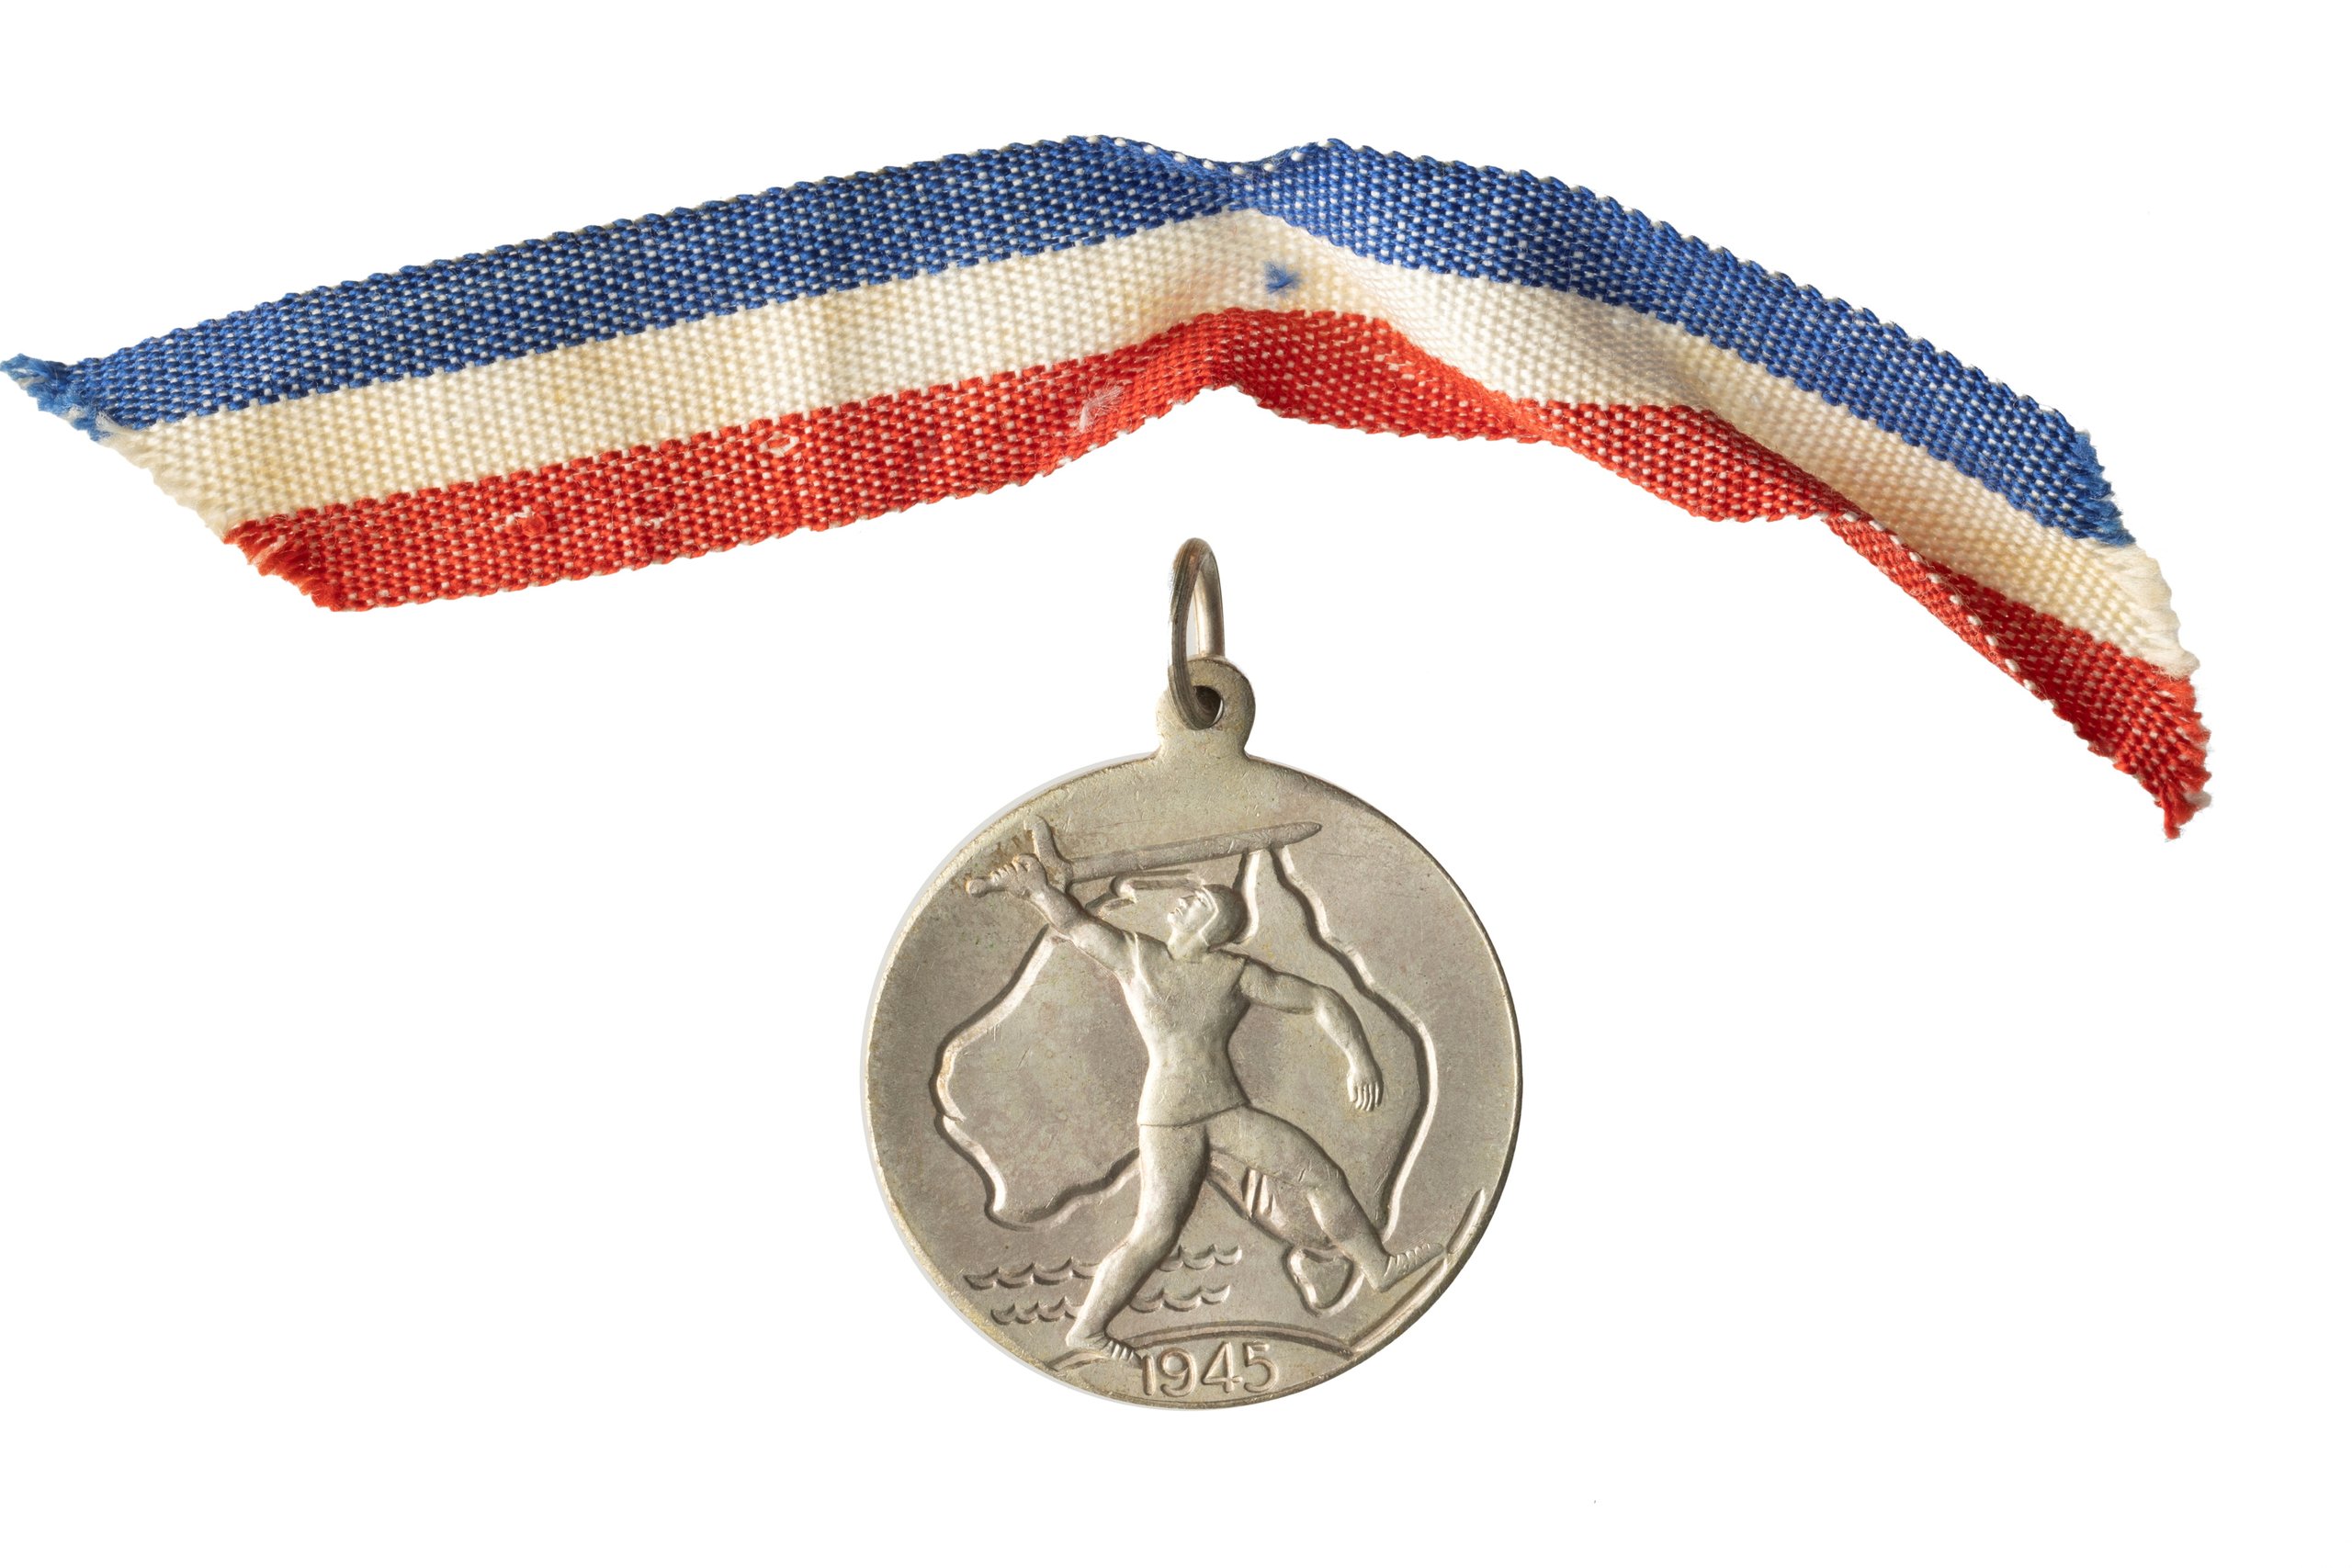 School Childrens Victory medal commemorating the end of WW II in Europe